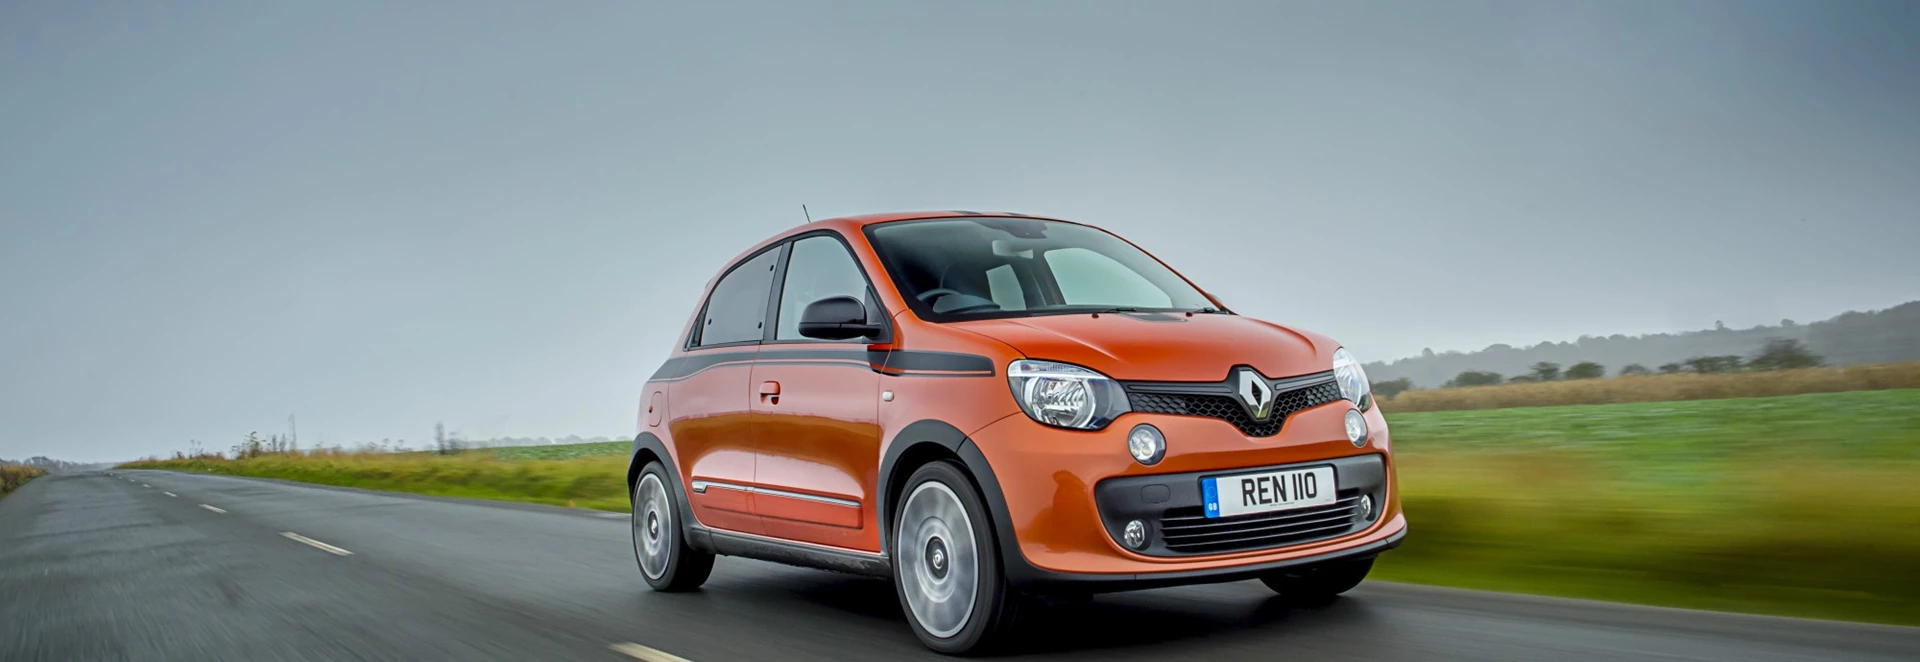 Renault Twingo GT TCe 110 hatchback review 